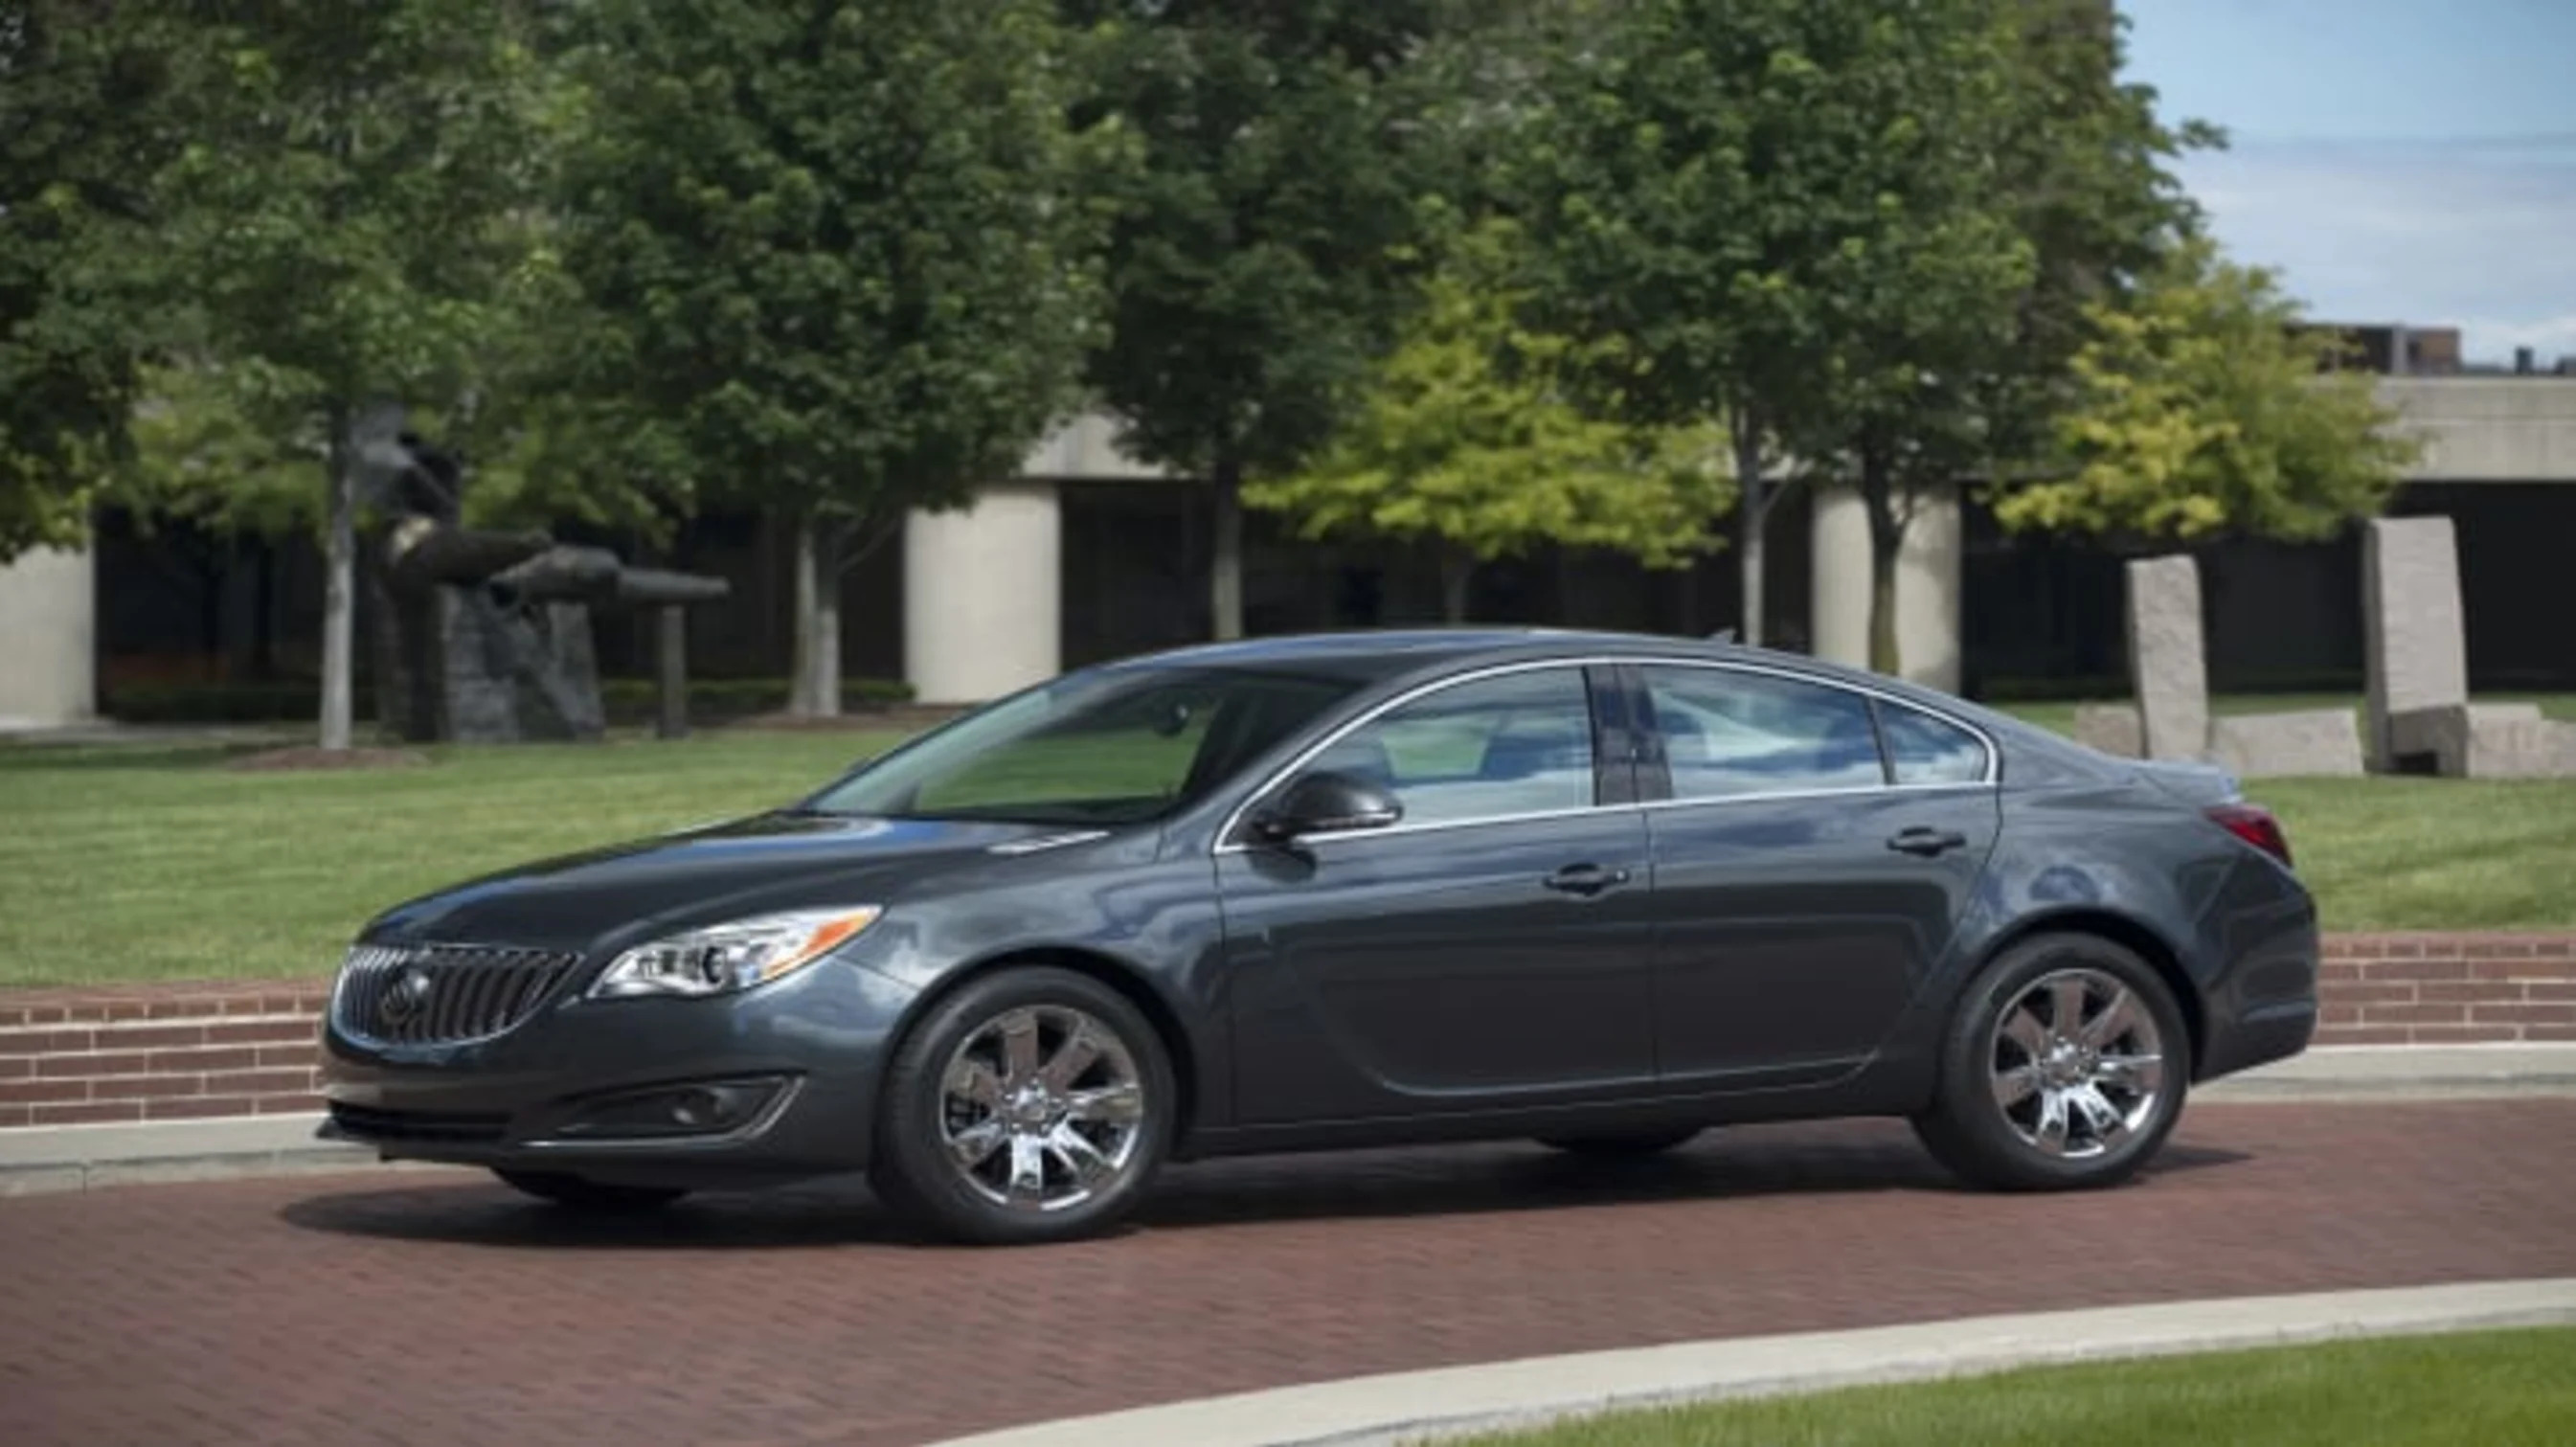 2016 Buick Regal in Ashen Gray exterior color and equipped with 18â wheels, sunroof and driver confidence page l and ll.